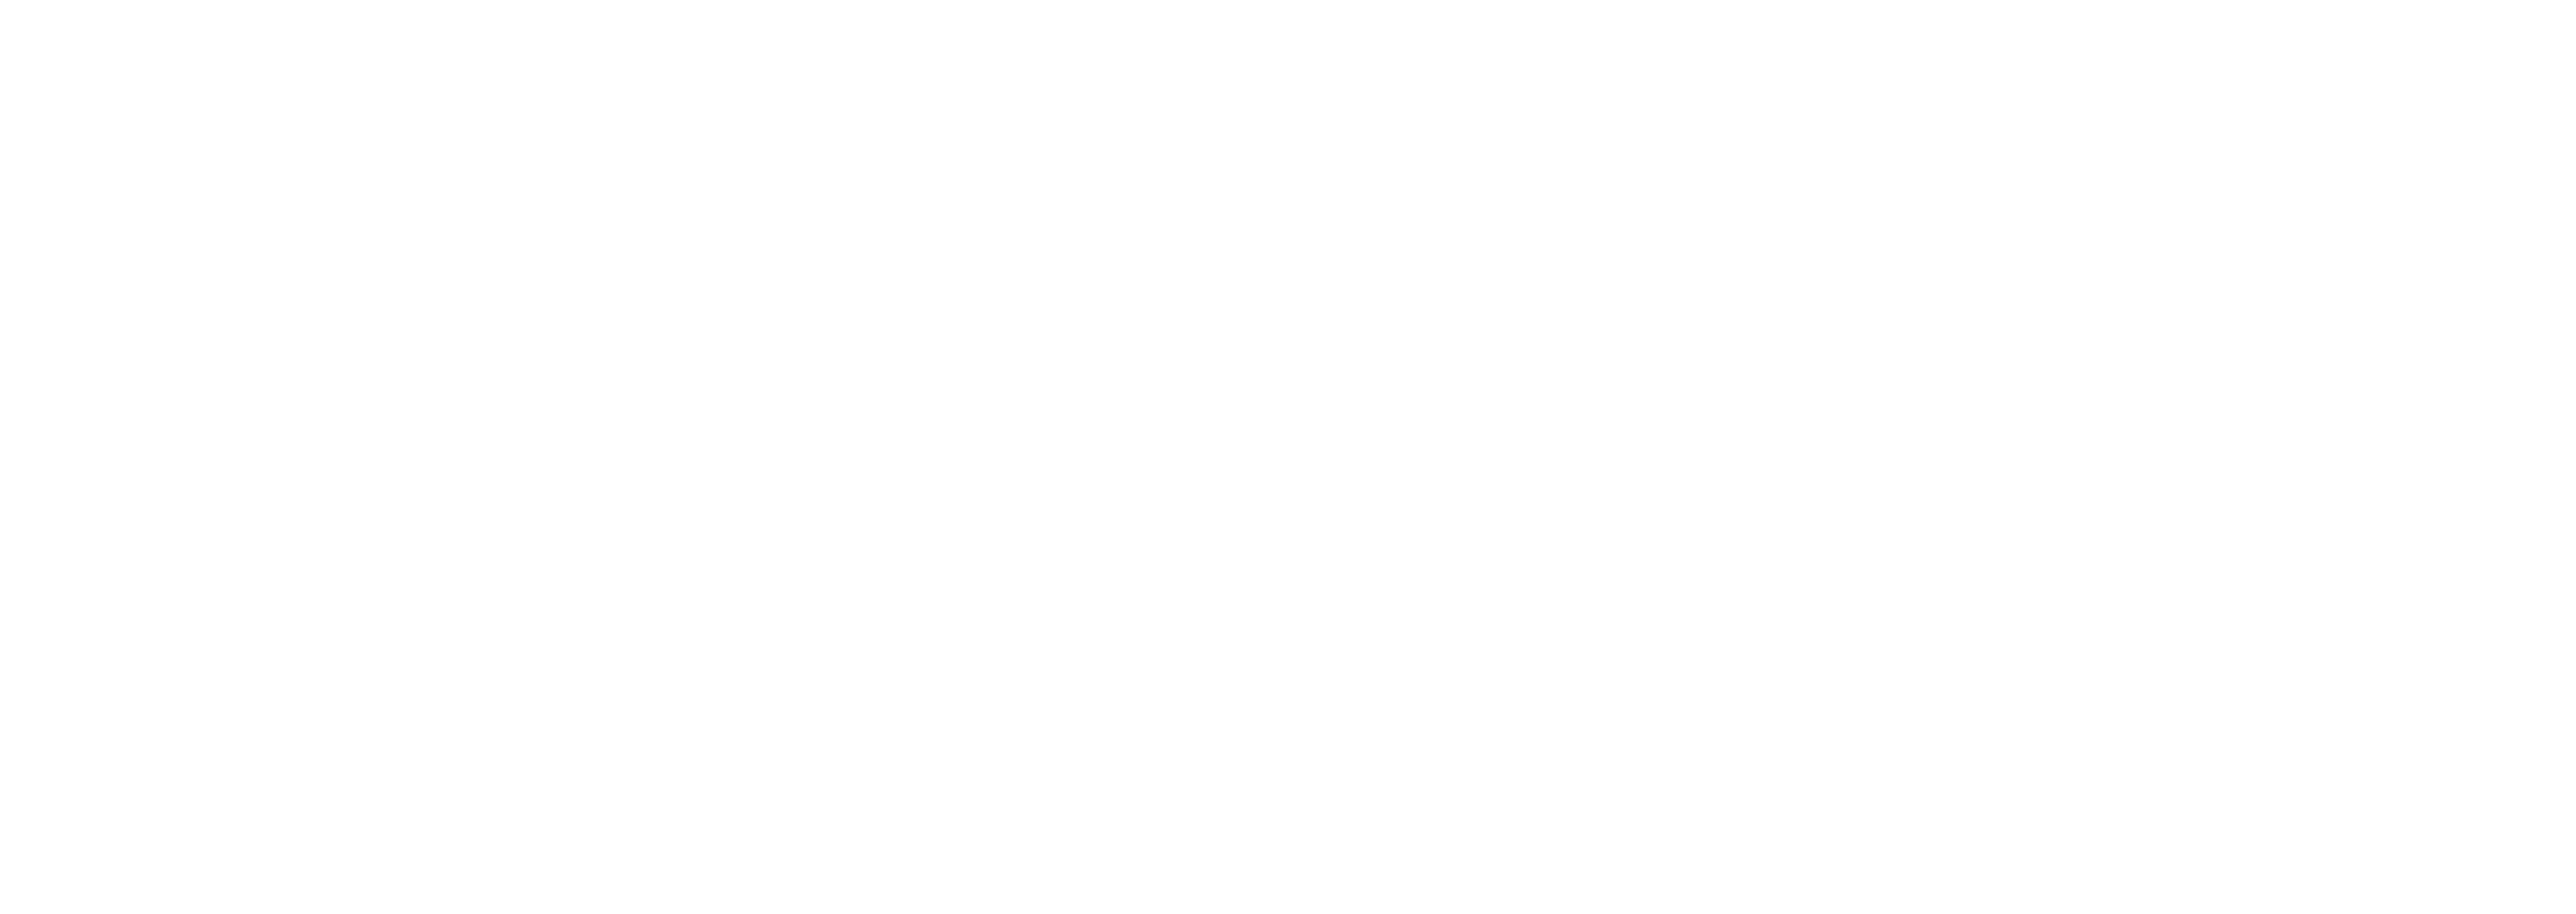 BuildingLens logo, which is an icon of a white 3-4 story building with a magnifier glass. A white word "Building" is stacked on a white word "Lens" to the right of the icon.